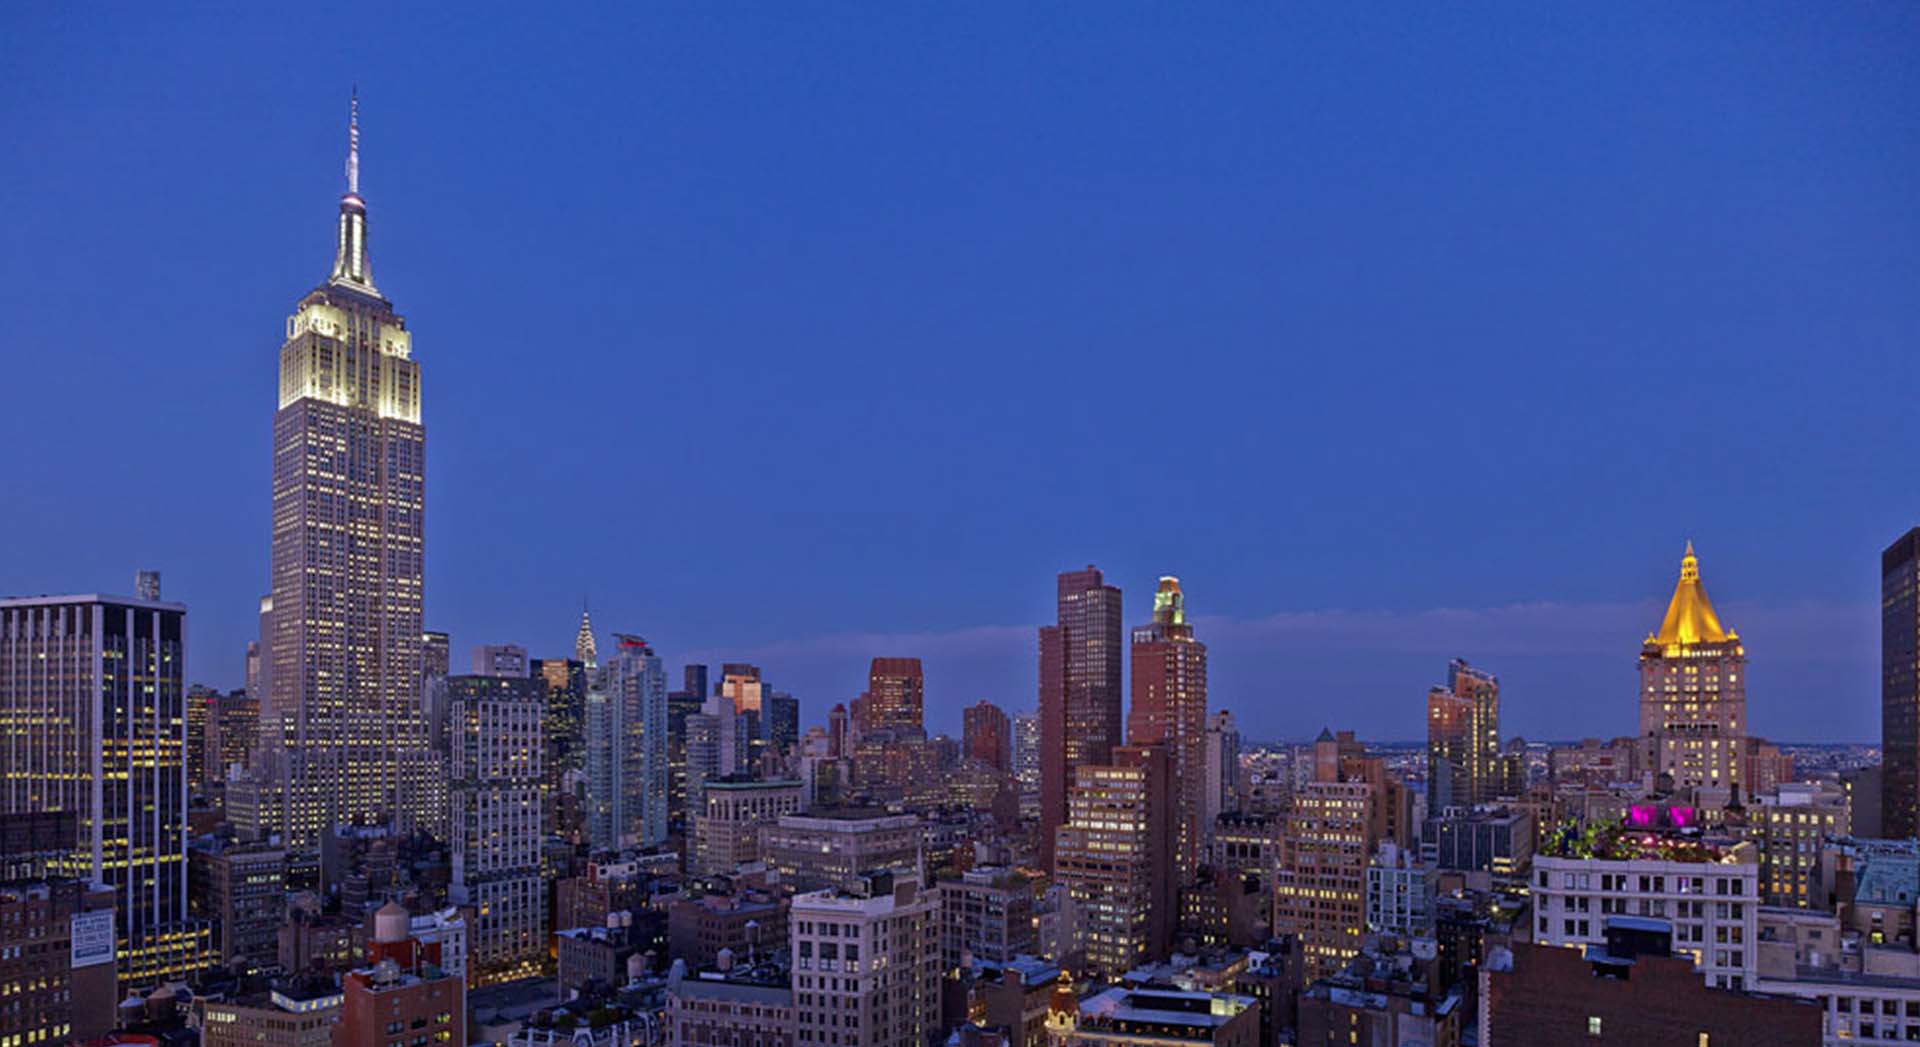 View of the manhattan skyline at dusk with the empire state building illuminated in white